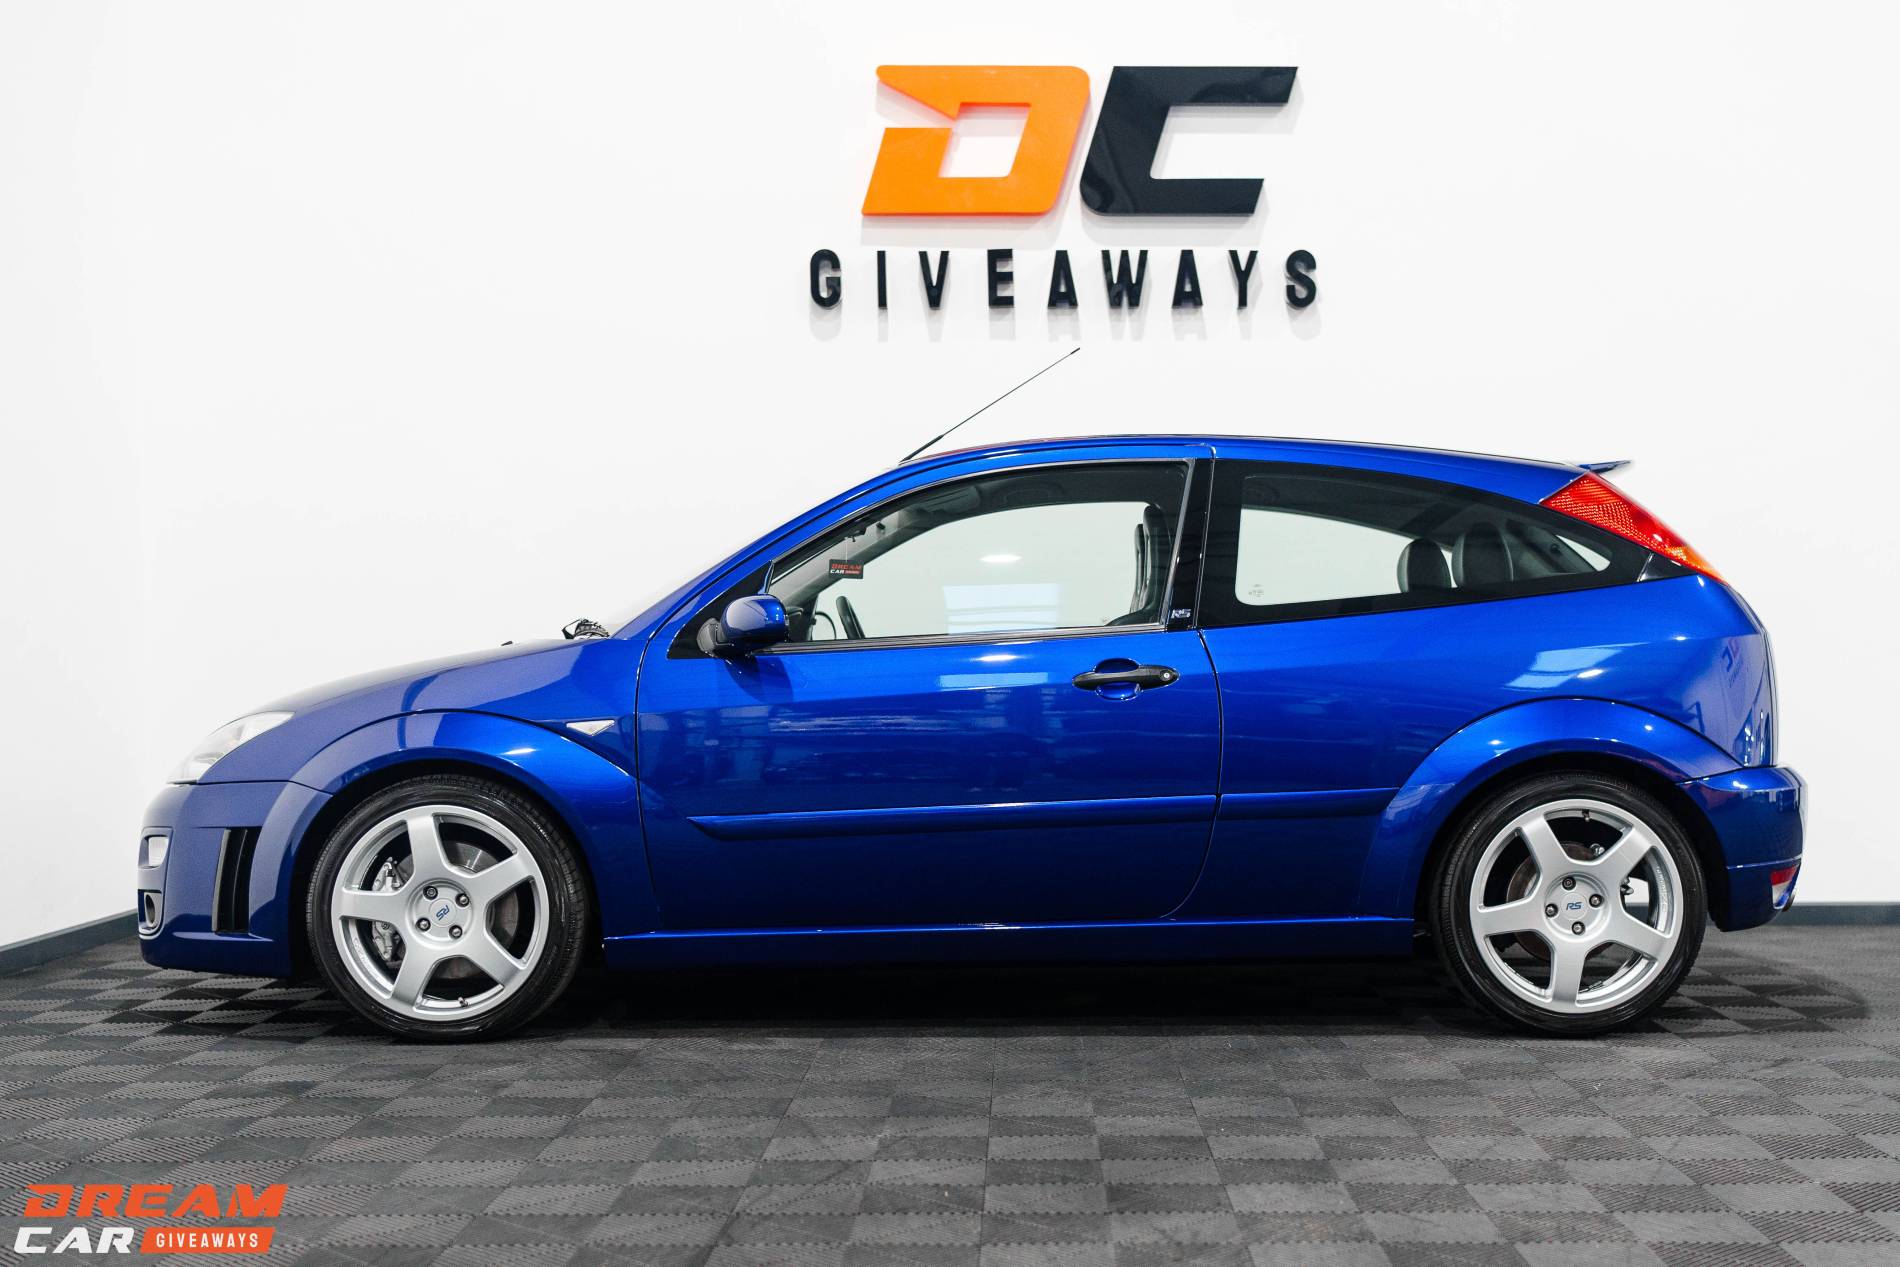 Win this Ford Focus RS Mk1